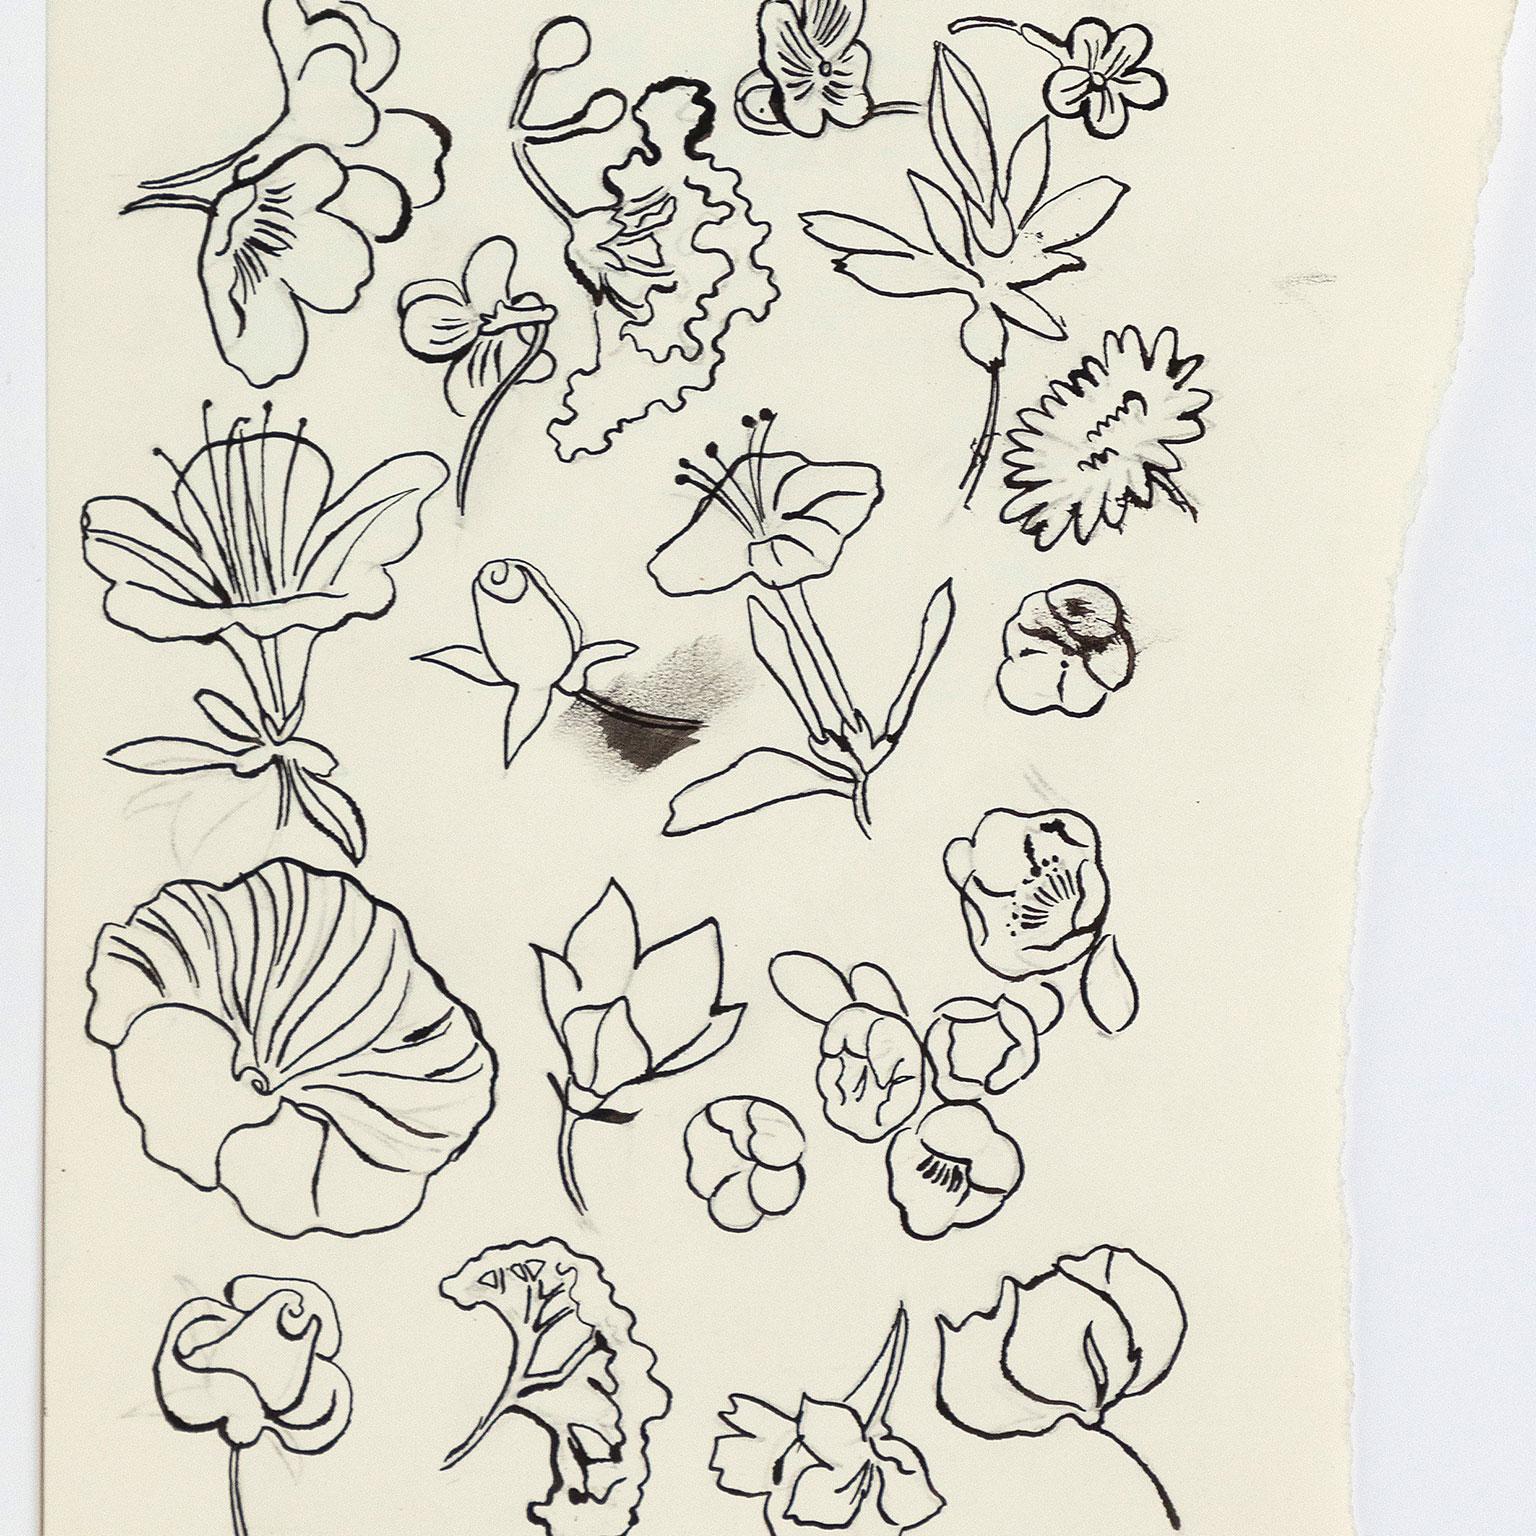 Family of Flowers - Art by Andy Warhol